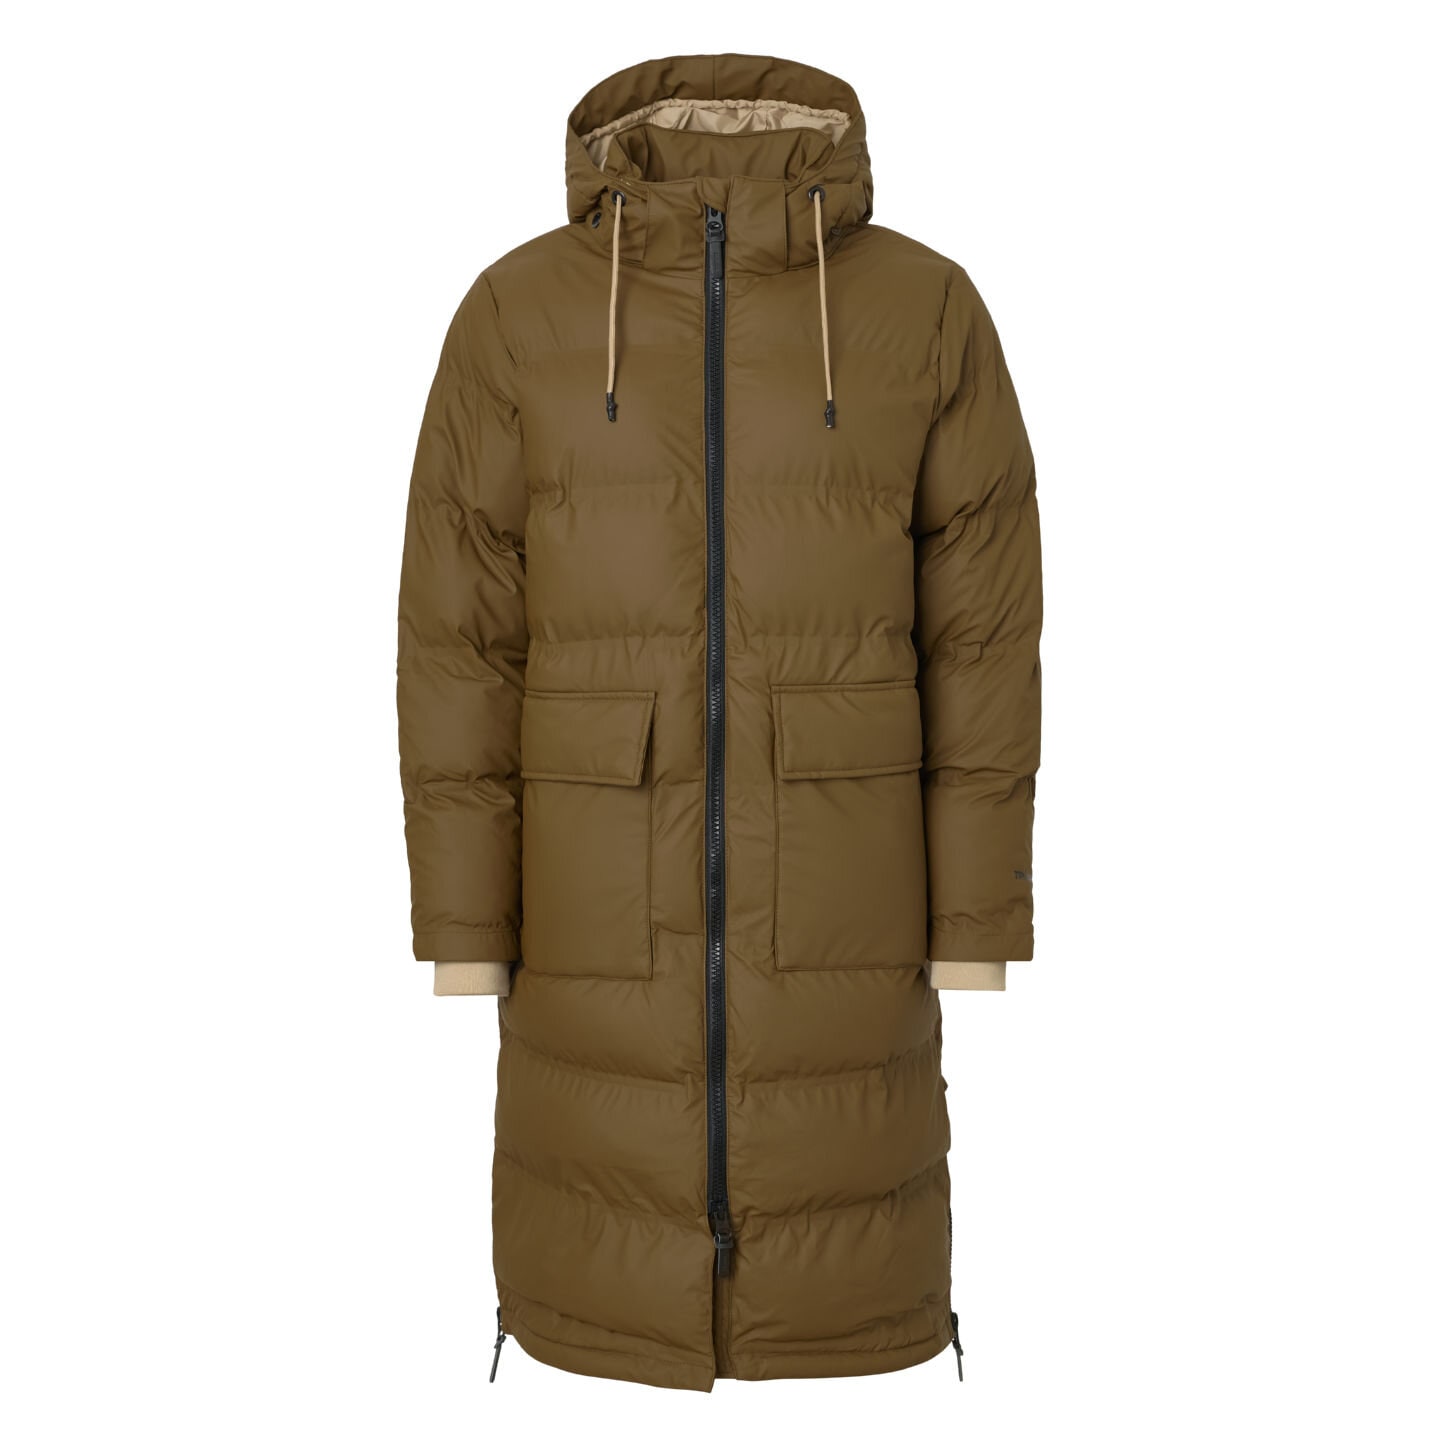 Women's winter jackets to keep you warm & dry